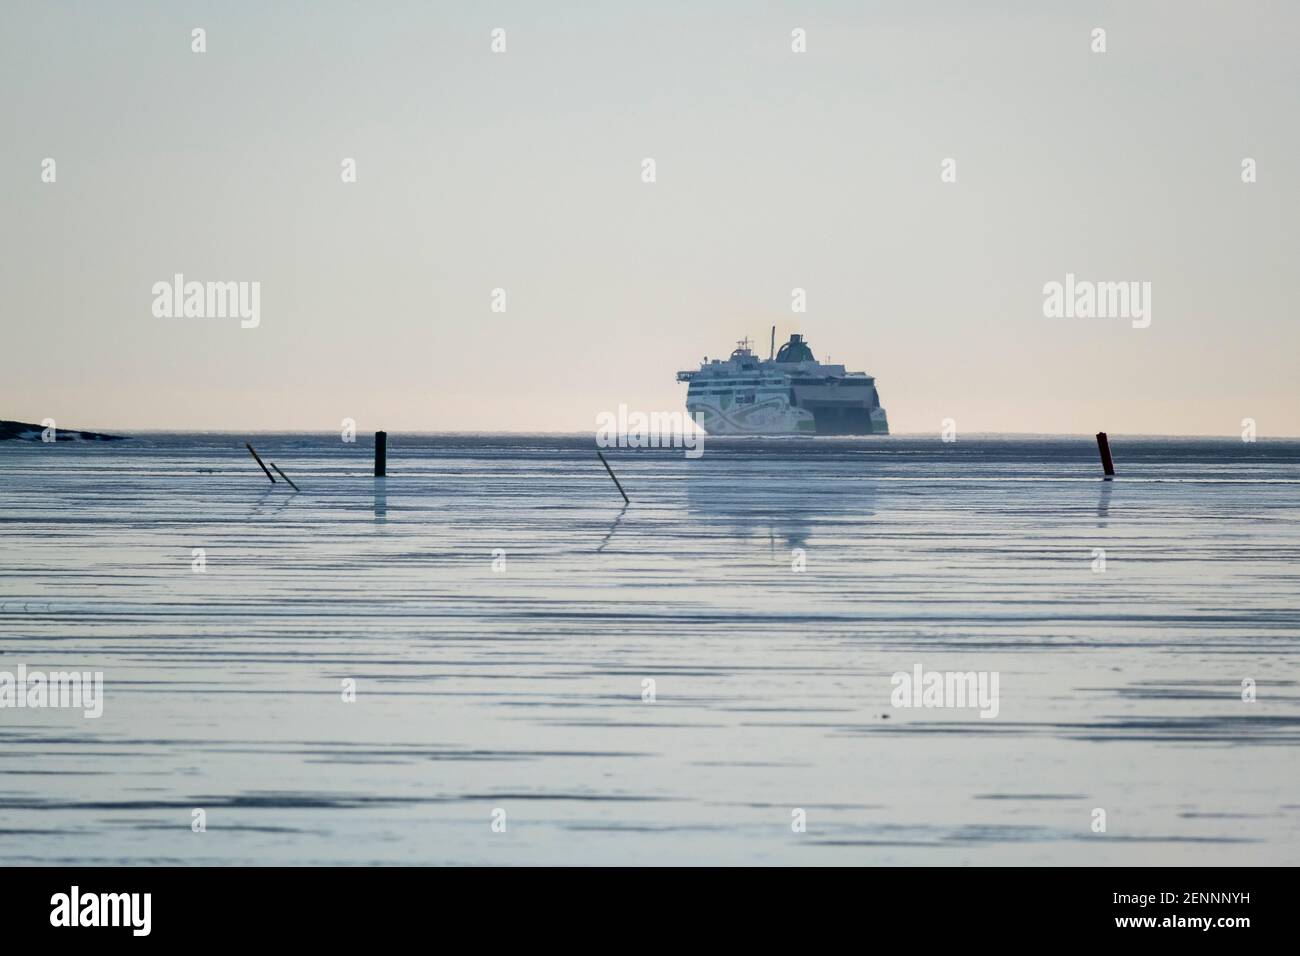 Helsinki / Finland - FEBRUARY 26, 2021: A view of a frozen sea with a large passenger RORO-ferry in the background. Stock Photo